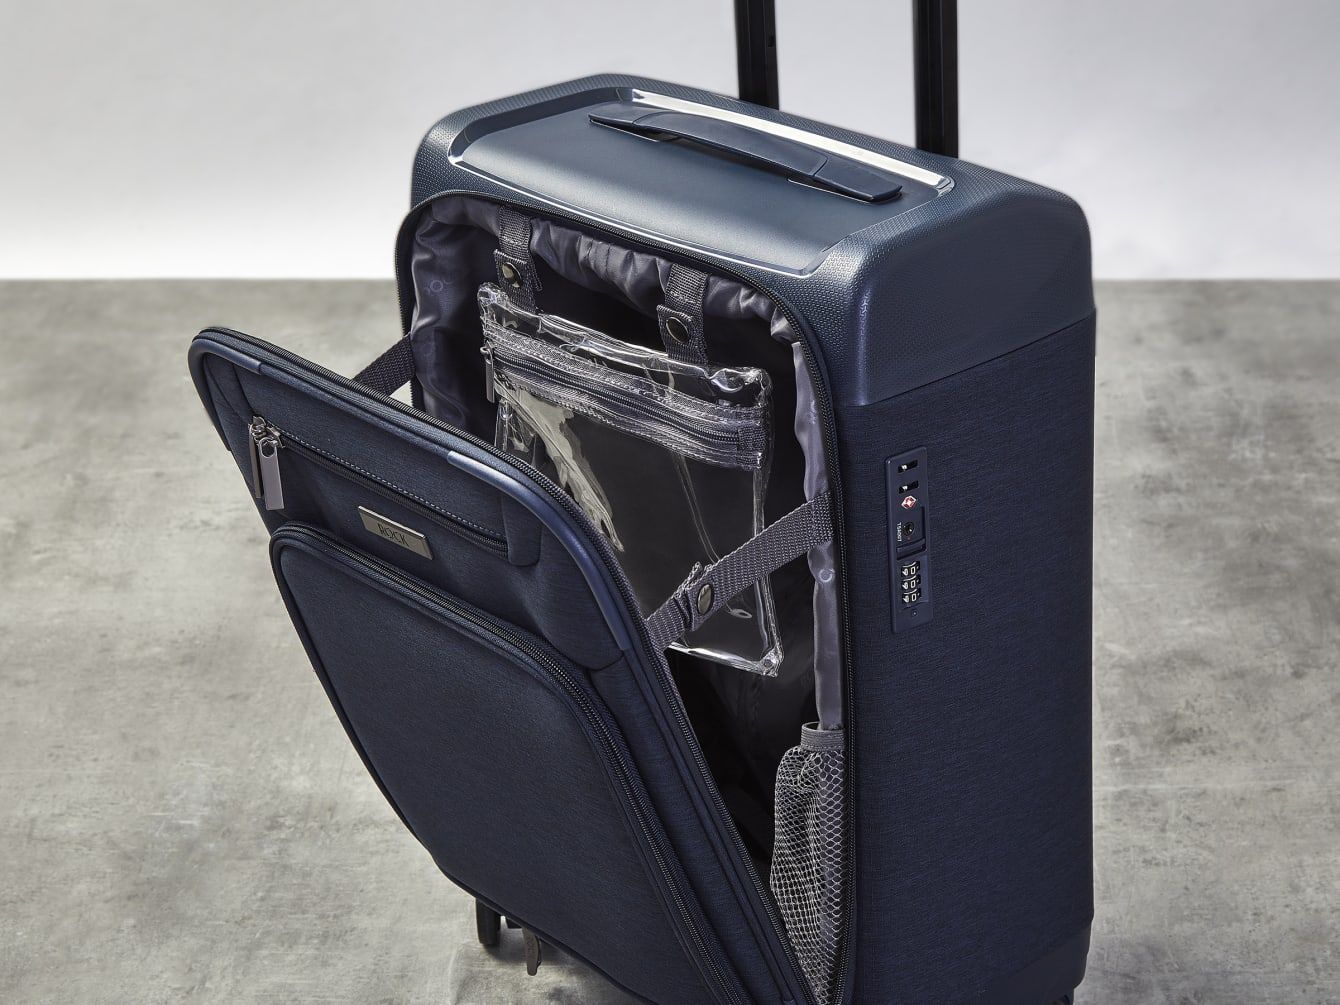 Best of both worlds! This Rock suitcase is made from ultra-strong polypropylene frame combined with a fabric body.
Parker’s carry-on size has an easy access laptop section and is packed full of useful features such a removeable waterproof pouch.
Built to last - all Rock products come with a 15 year manufacturer’s warranty against manufacturing defects arising from faulty workmanship or materials.
Tough & Practical - 8 smooth rolling wheels and a telescopic, push-button handle will help you glide effortlessly on your travels.
For your complete peace of mind, Parker cases are fitted with an integrated TSA combination lock.
The design includes a zipped front pocket which can be used for conveniently storing smaller items or any last-minute extras you may need to squeeze in.
The fully lined interior also features a convenient zipped mesh pocket and elasticated packing straps to keep your clothes securely in place.